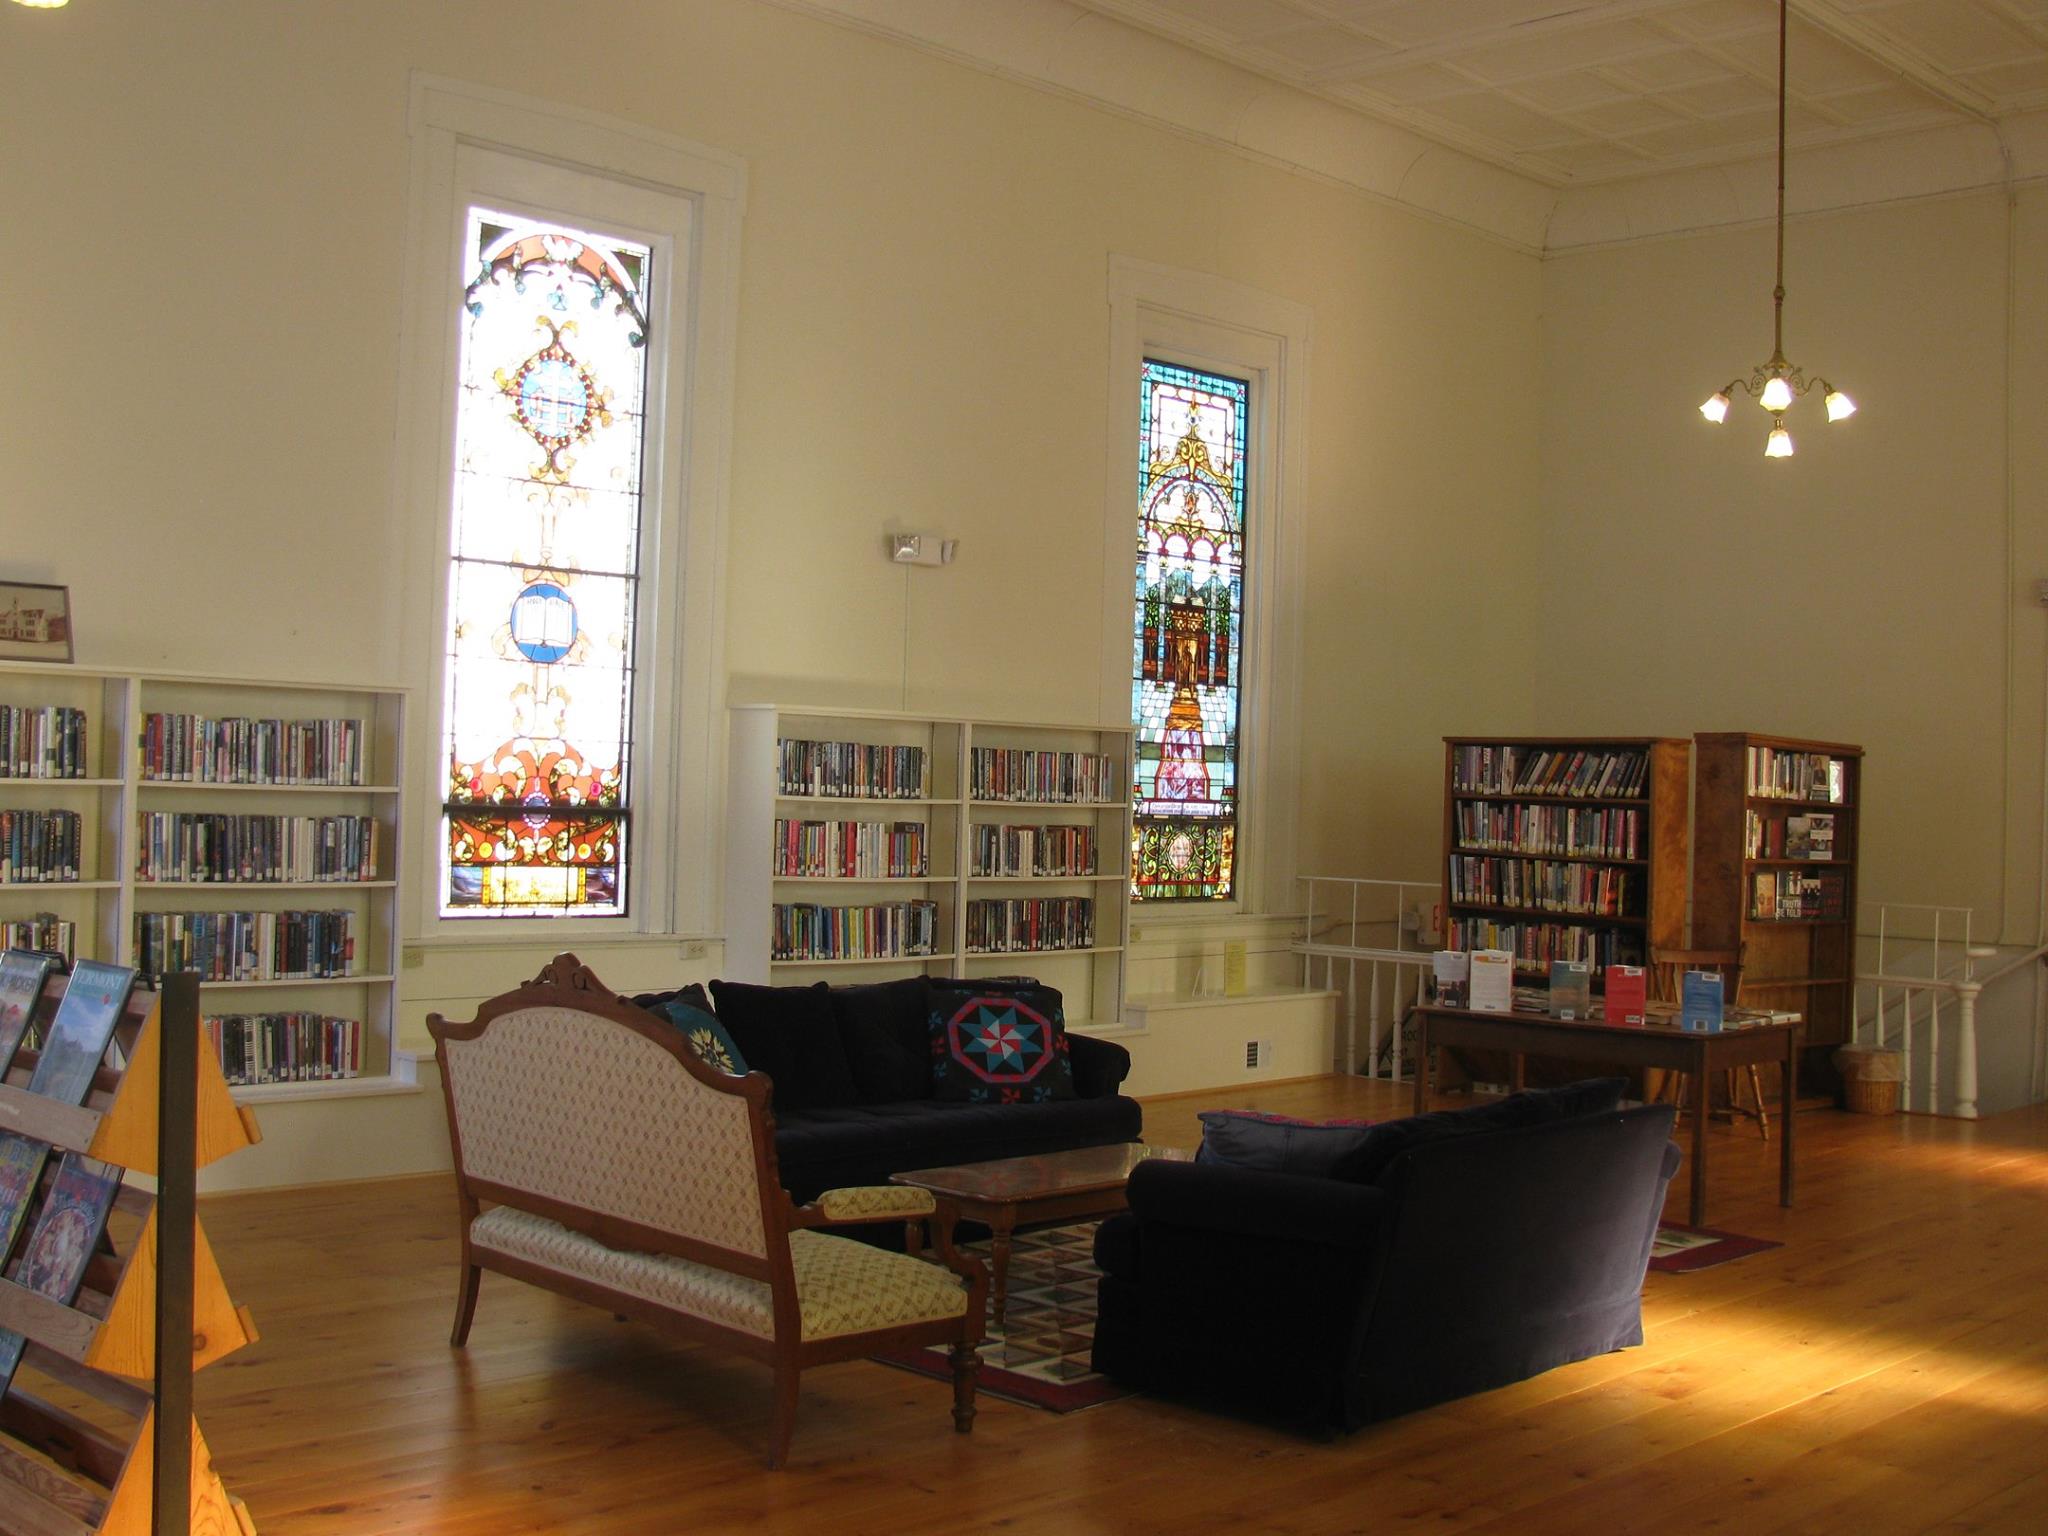 Second Floor of the library